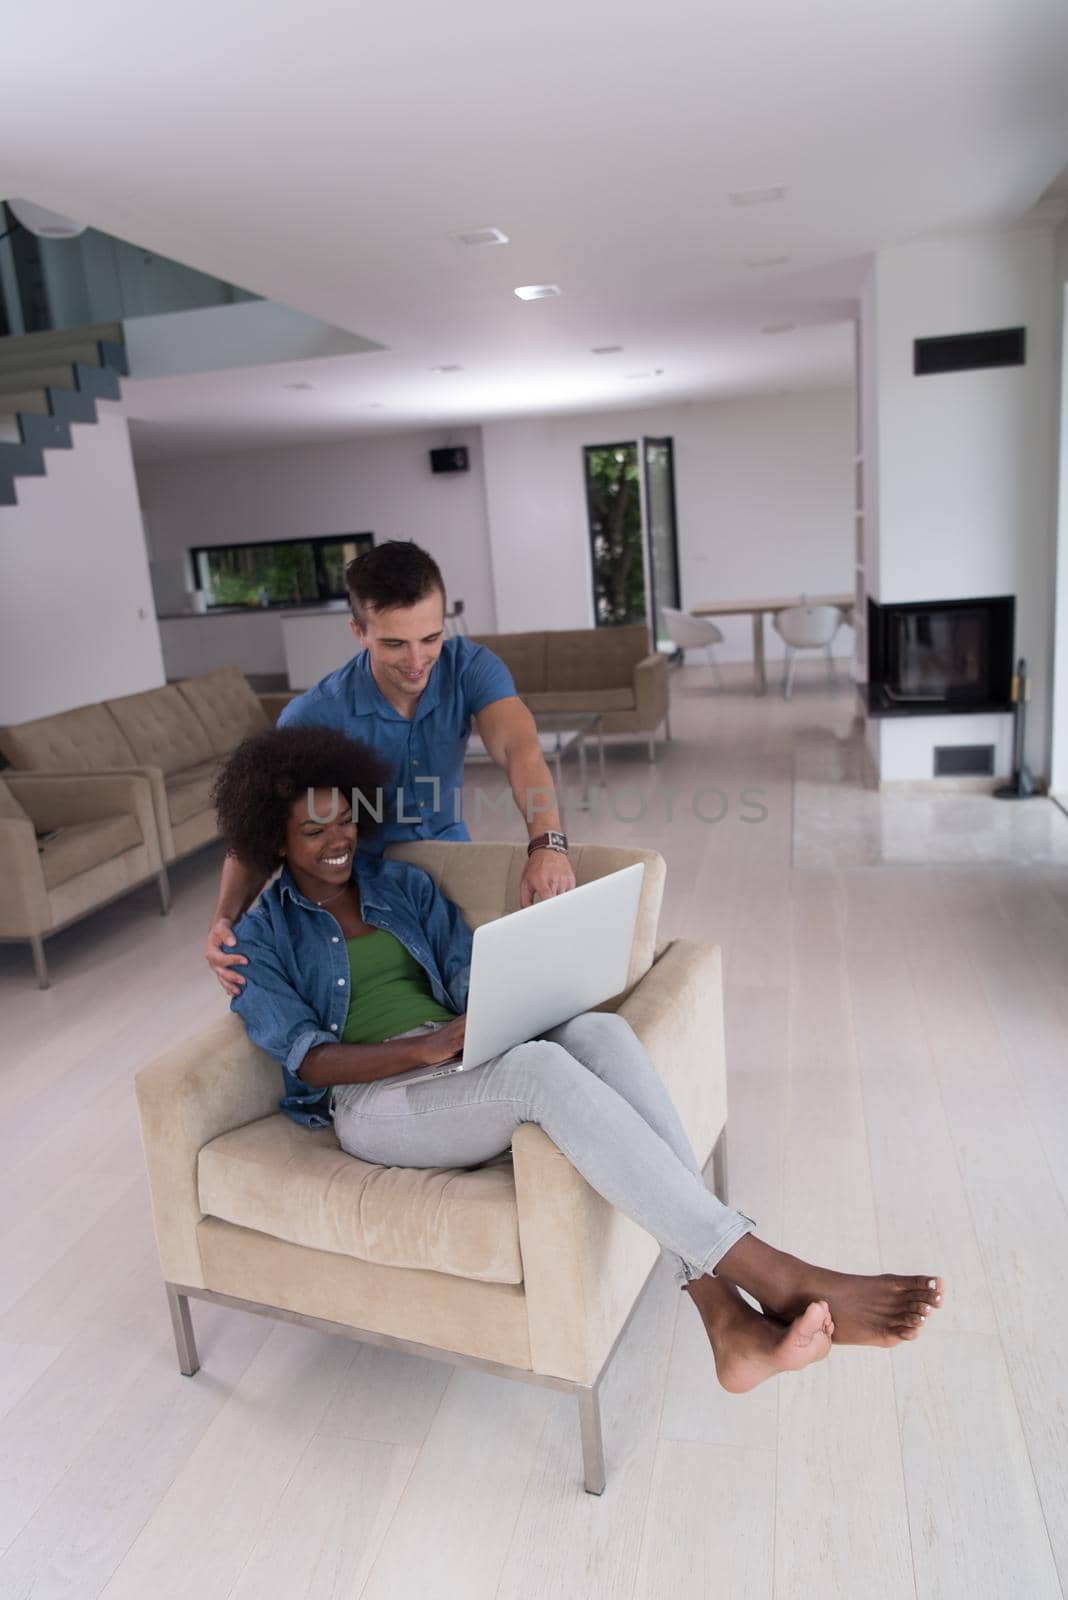 Young multiethnic couple sitting on an armchair in the luxury living room, using a laptop computer